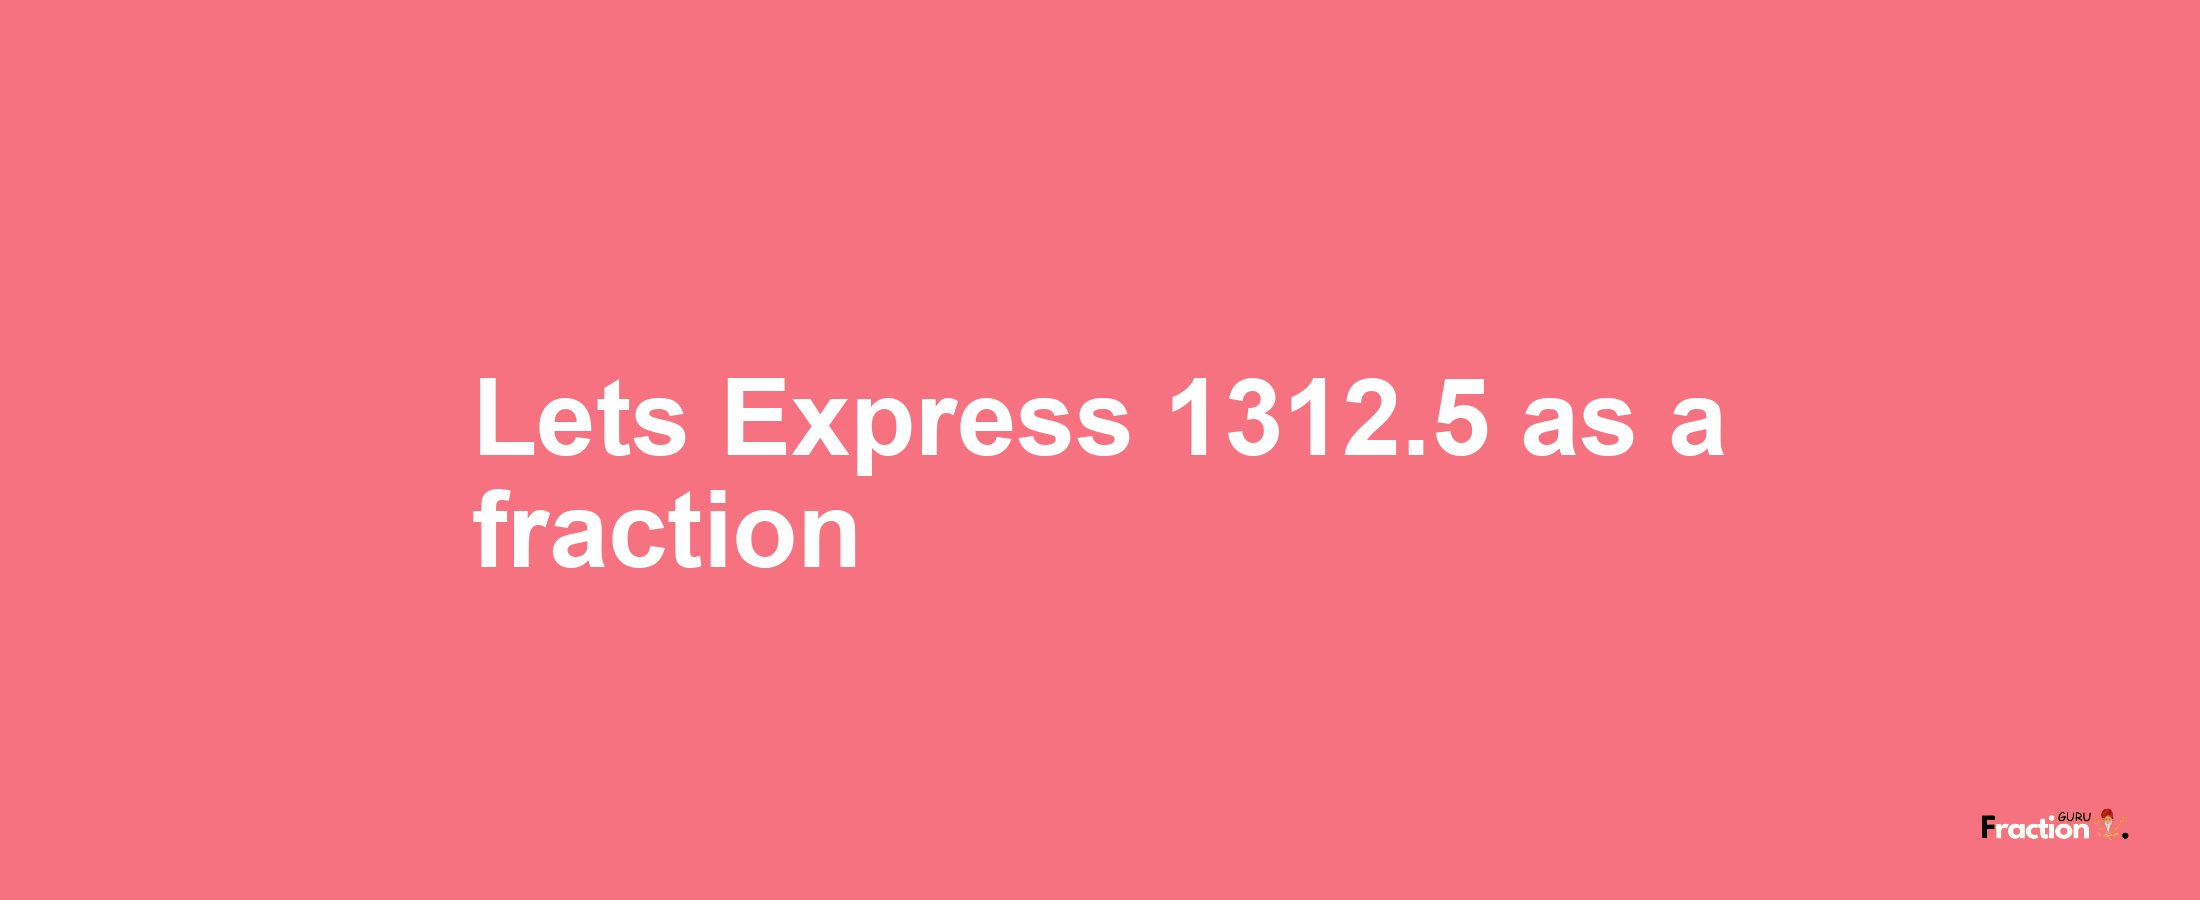 Lets Express 1312.5 as afraction